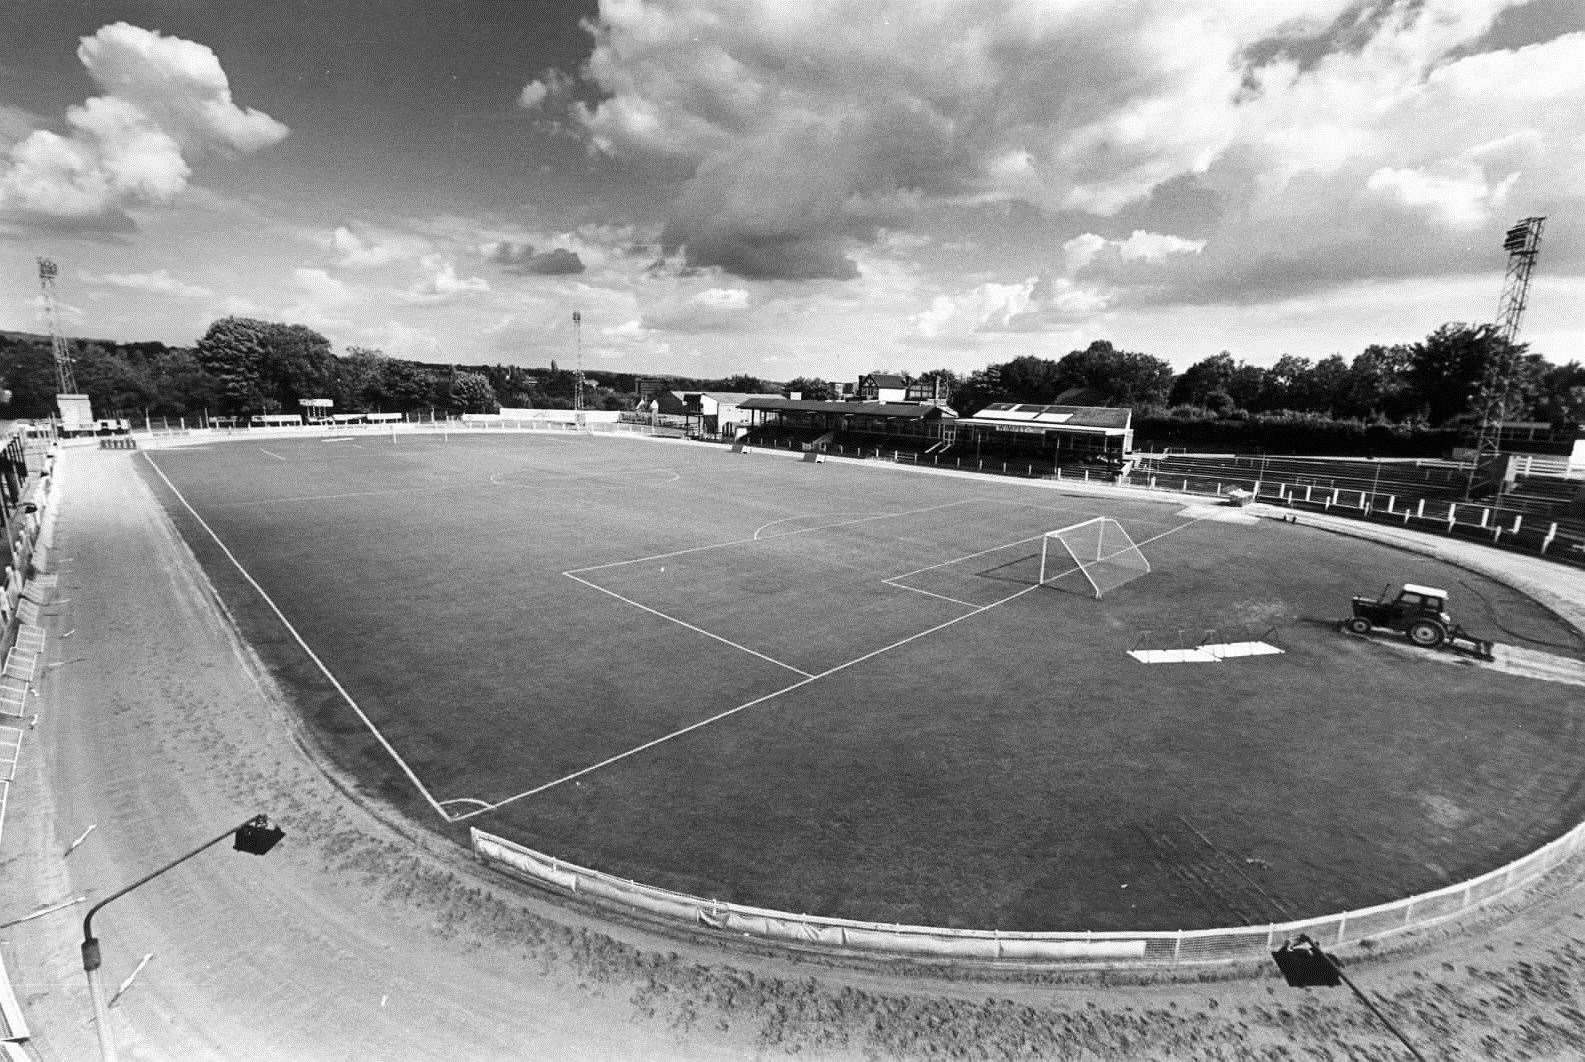 The Athletic Ground in Maidstone pictured here in August 1986 just a few years before it closed